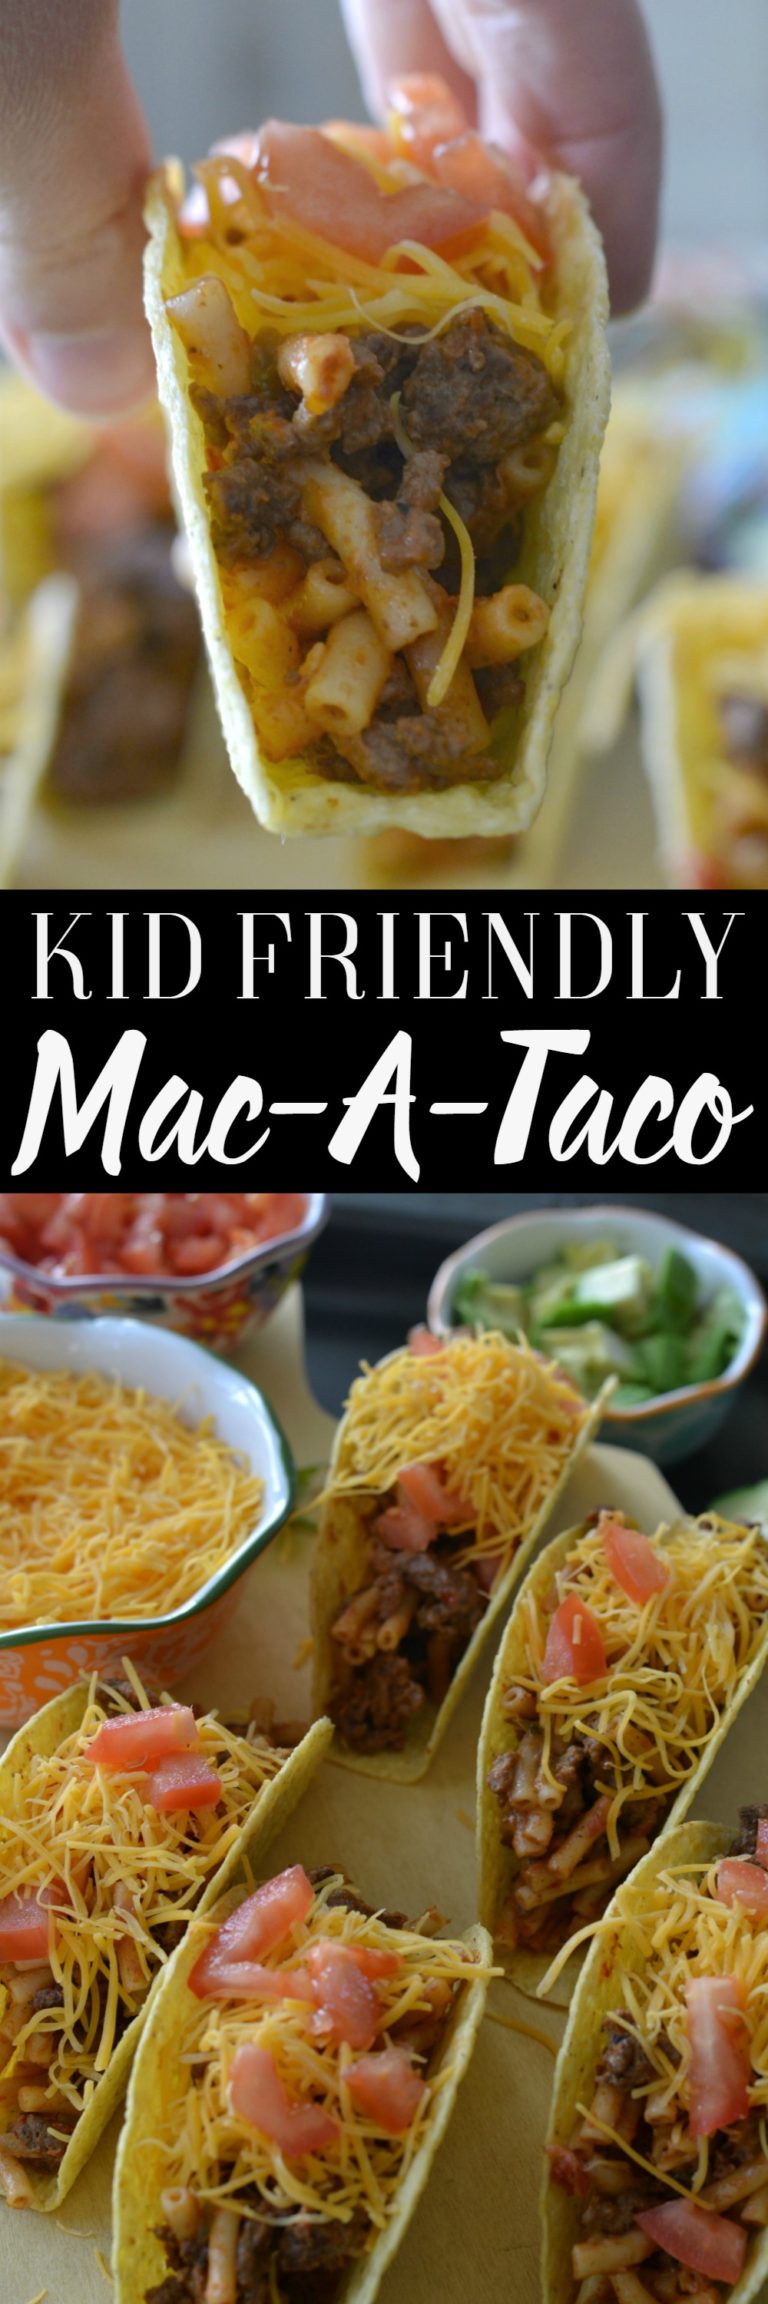 Mac-A-Taco - Houston Mommy and Lifestyle Blogger | Moms Without Answers